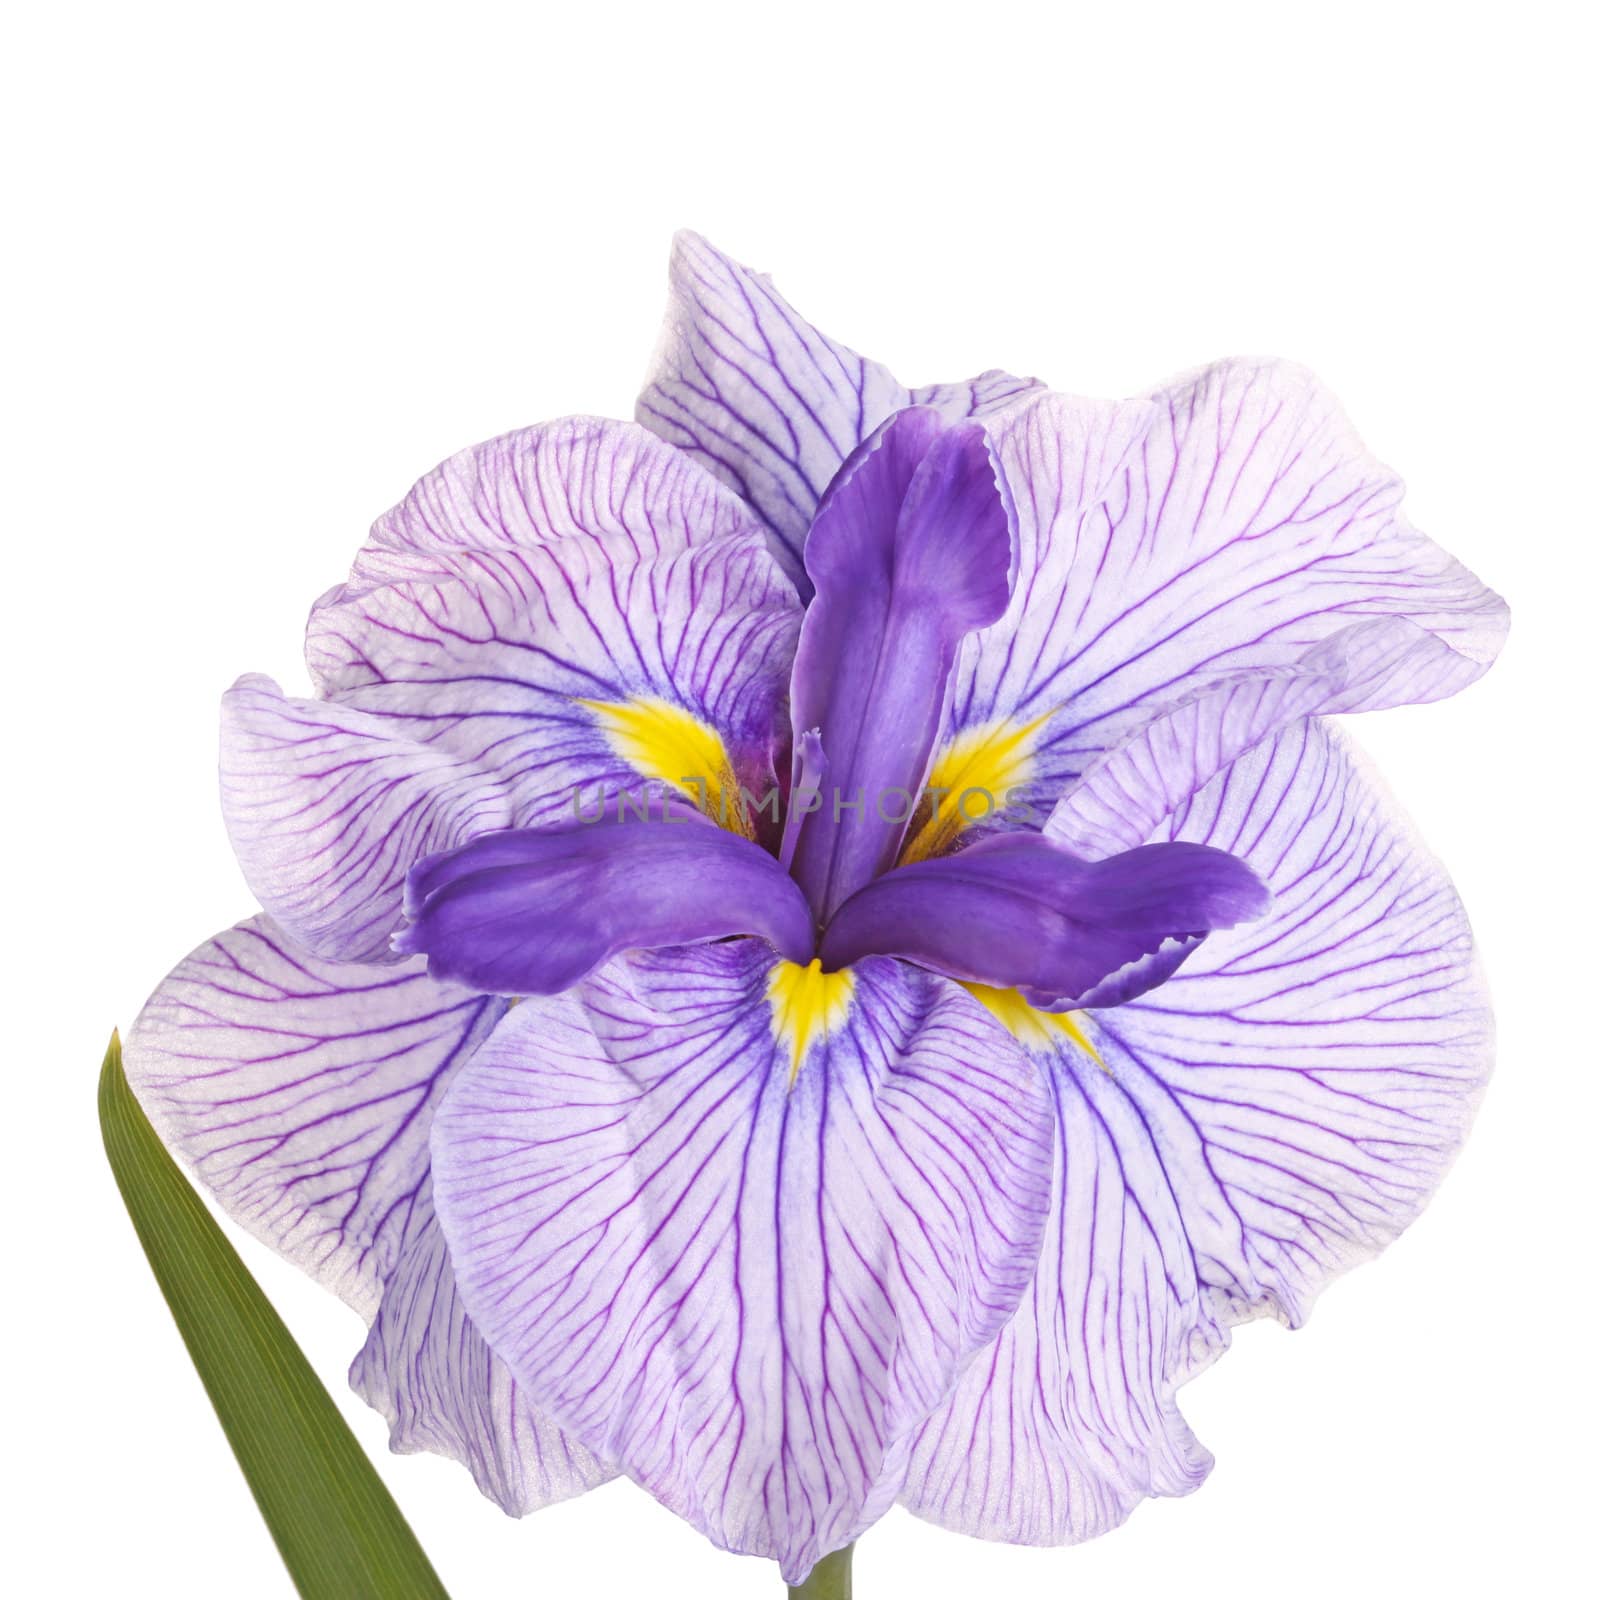 Purple, yellow and white flower of a Japanese iris cultivar (Iris ensata) isolated against a white background